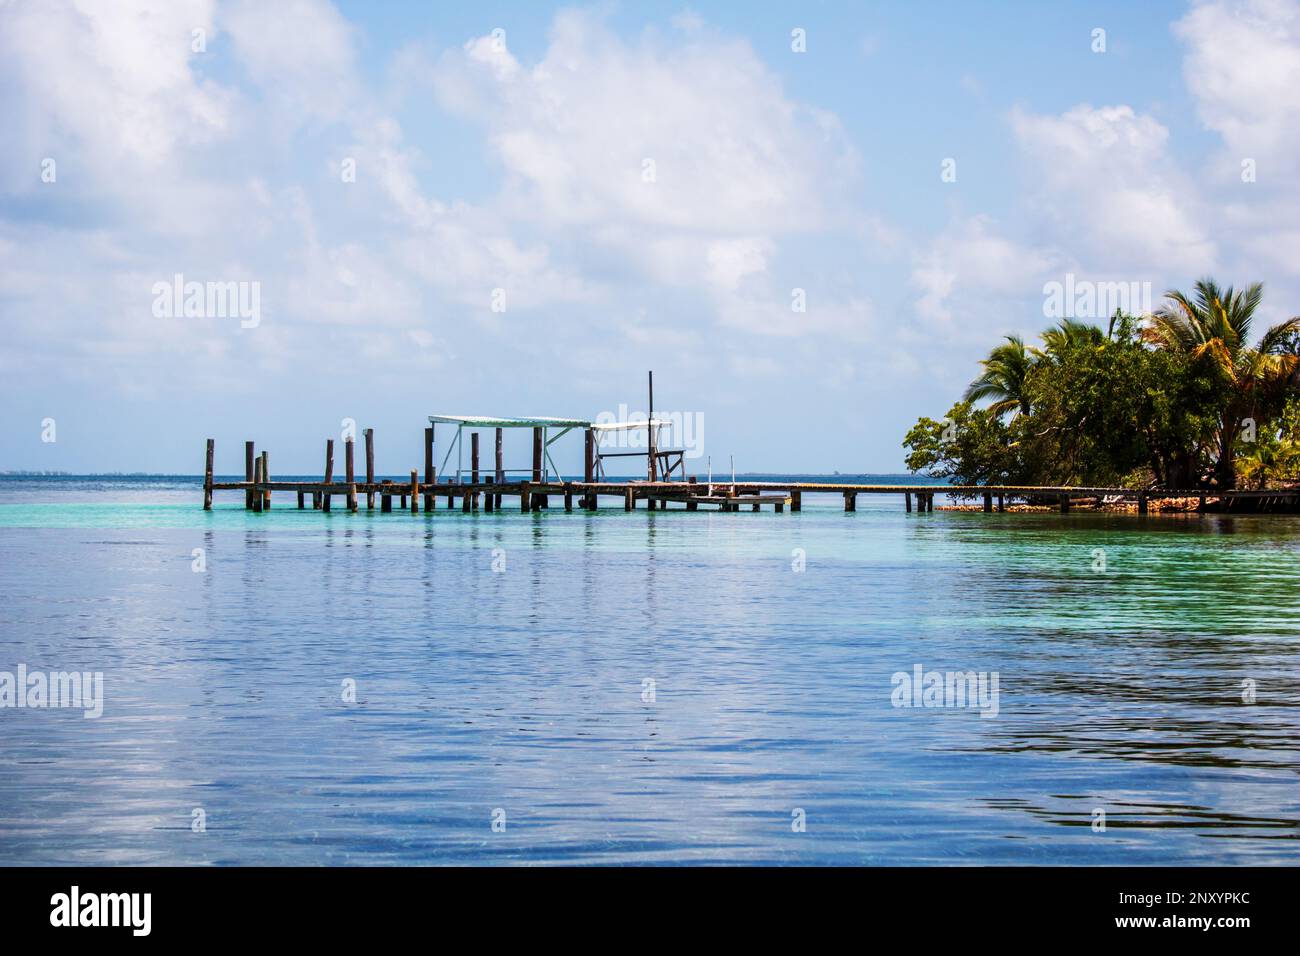 Molo sull'isola di South Water Caye Marine Reserve in Belize Barrier Reef Foto Stock